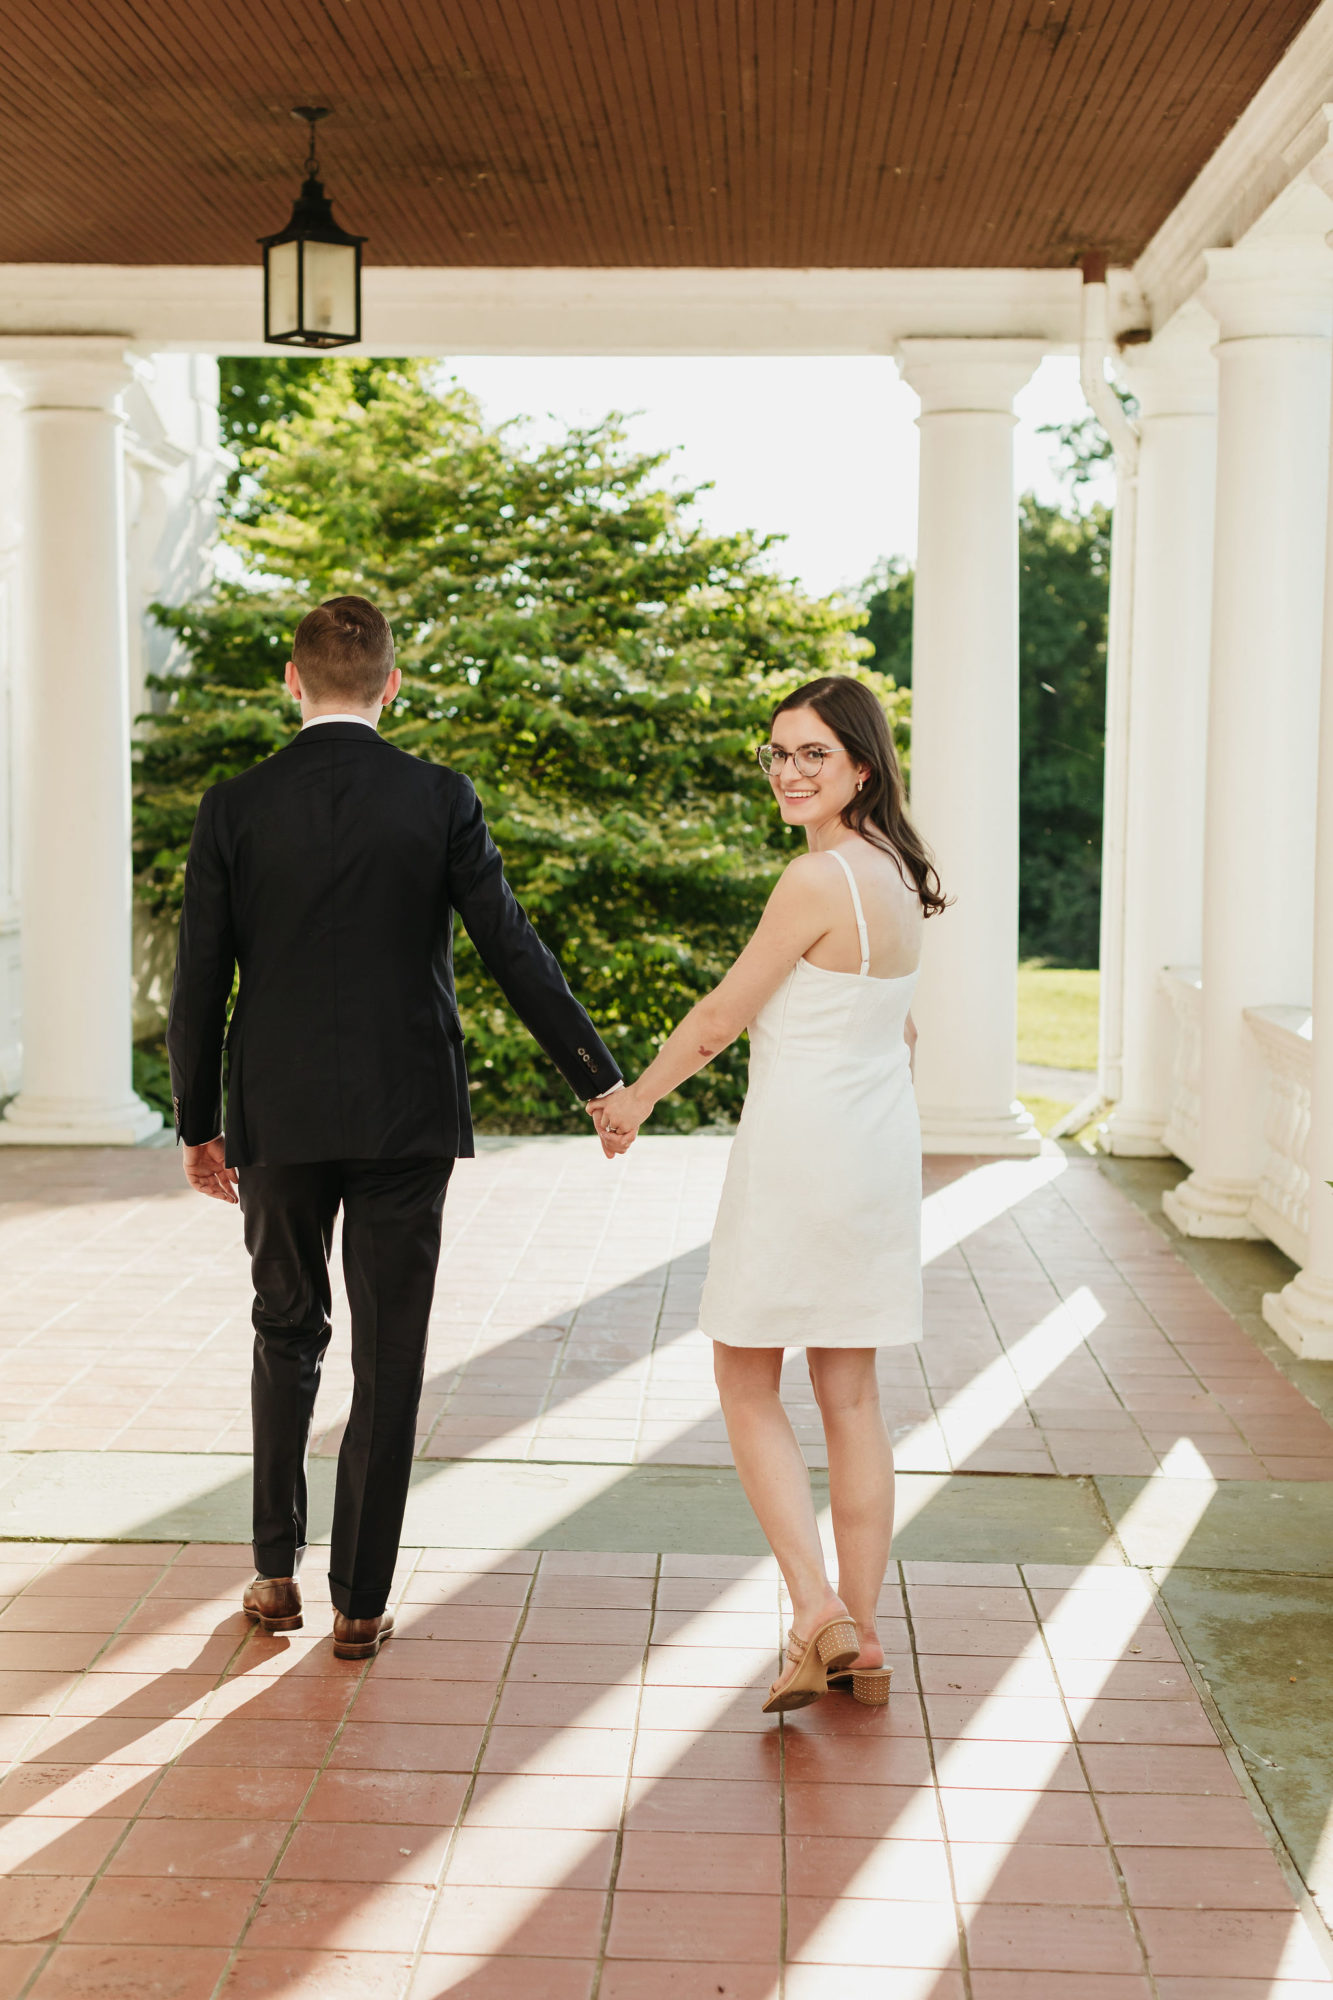 garden engagement photos, engagement photos, garden pictures, couples photos, engagement outfit inspiration, formal engagement outfits, Hudson Valley weddings, hudson valley photographer, catskills wedding photographer,